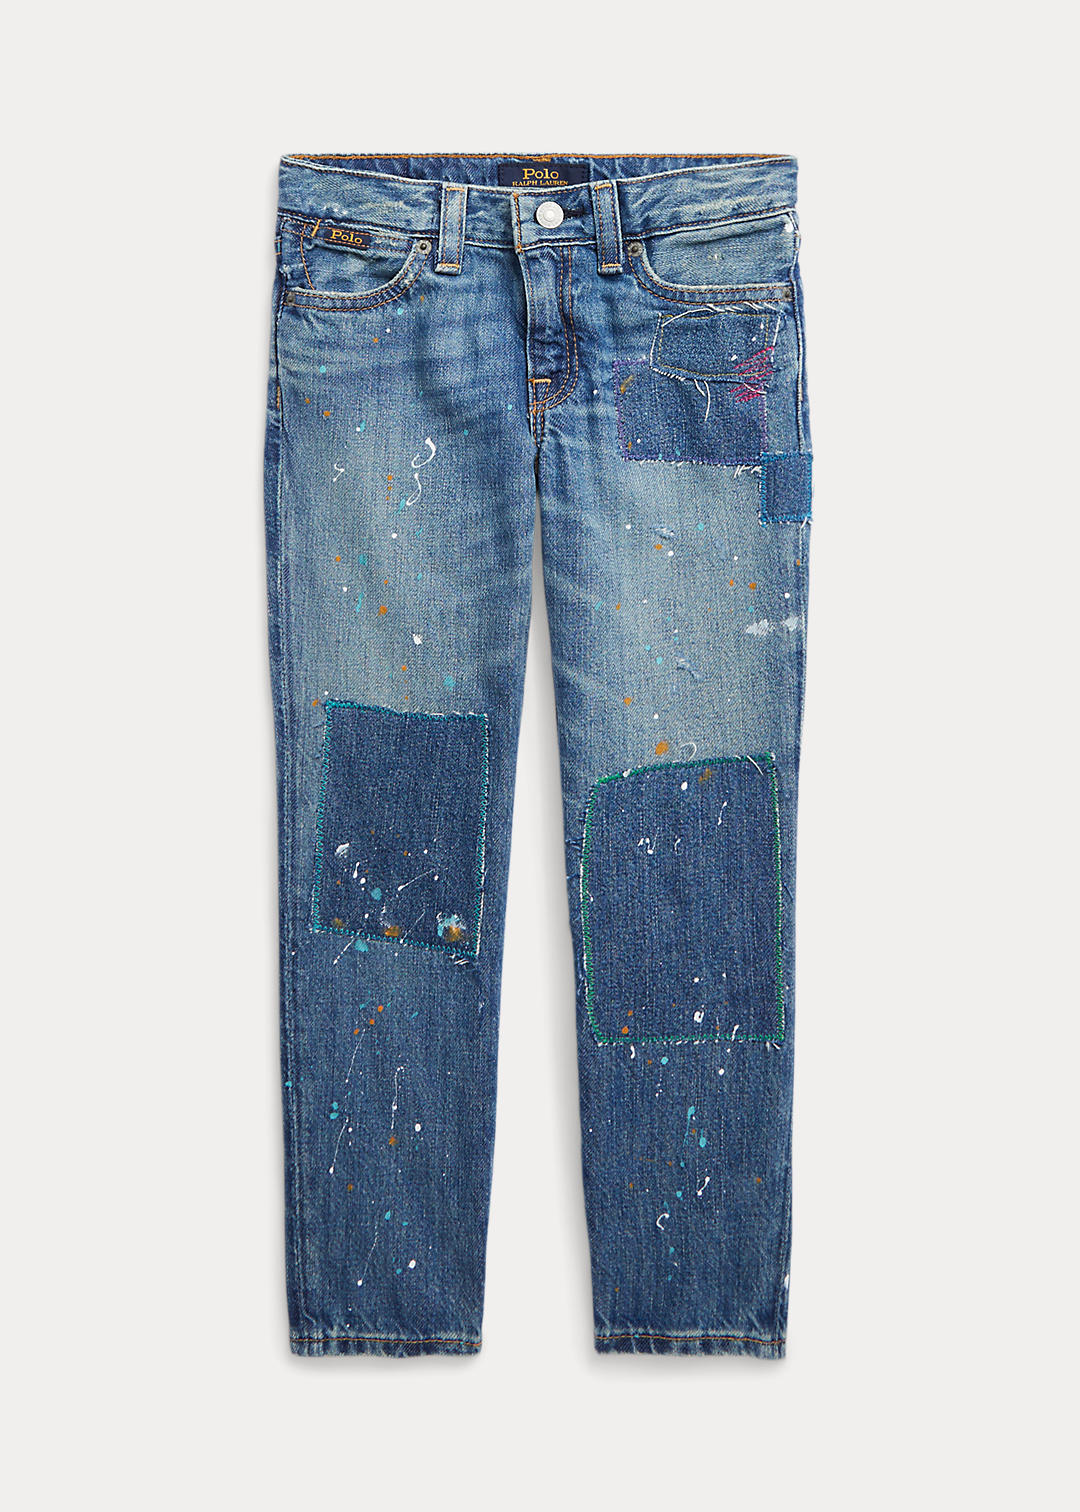 Blue With Red Paint Patchwork Splatter Jeans, Patchwork Paint Splatter  Jeans